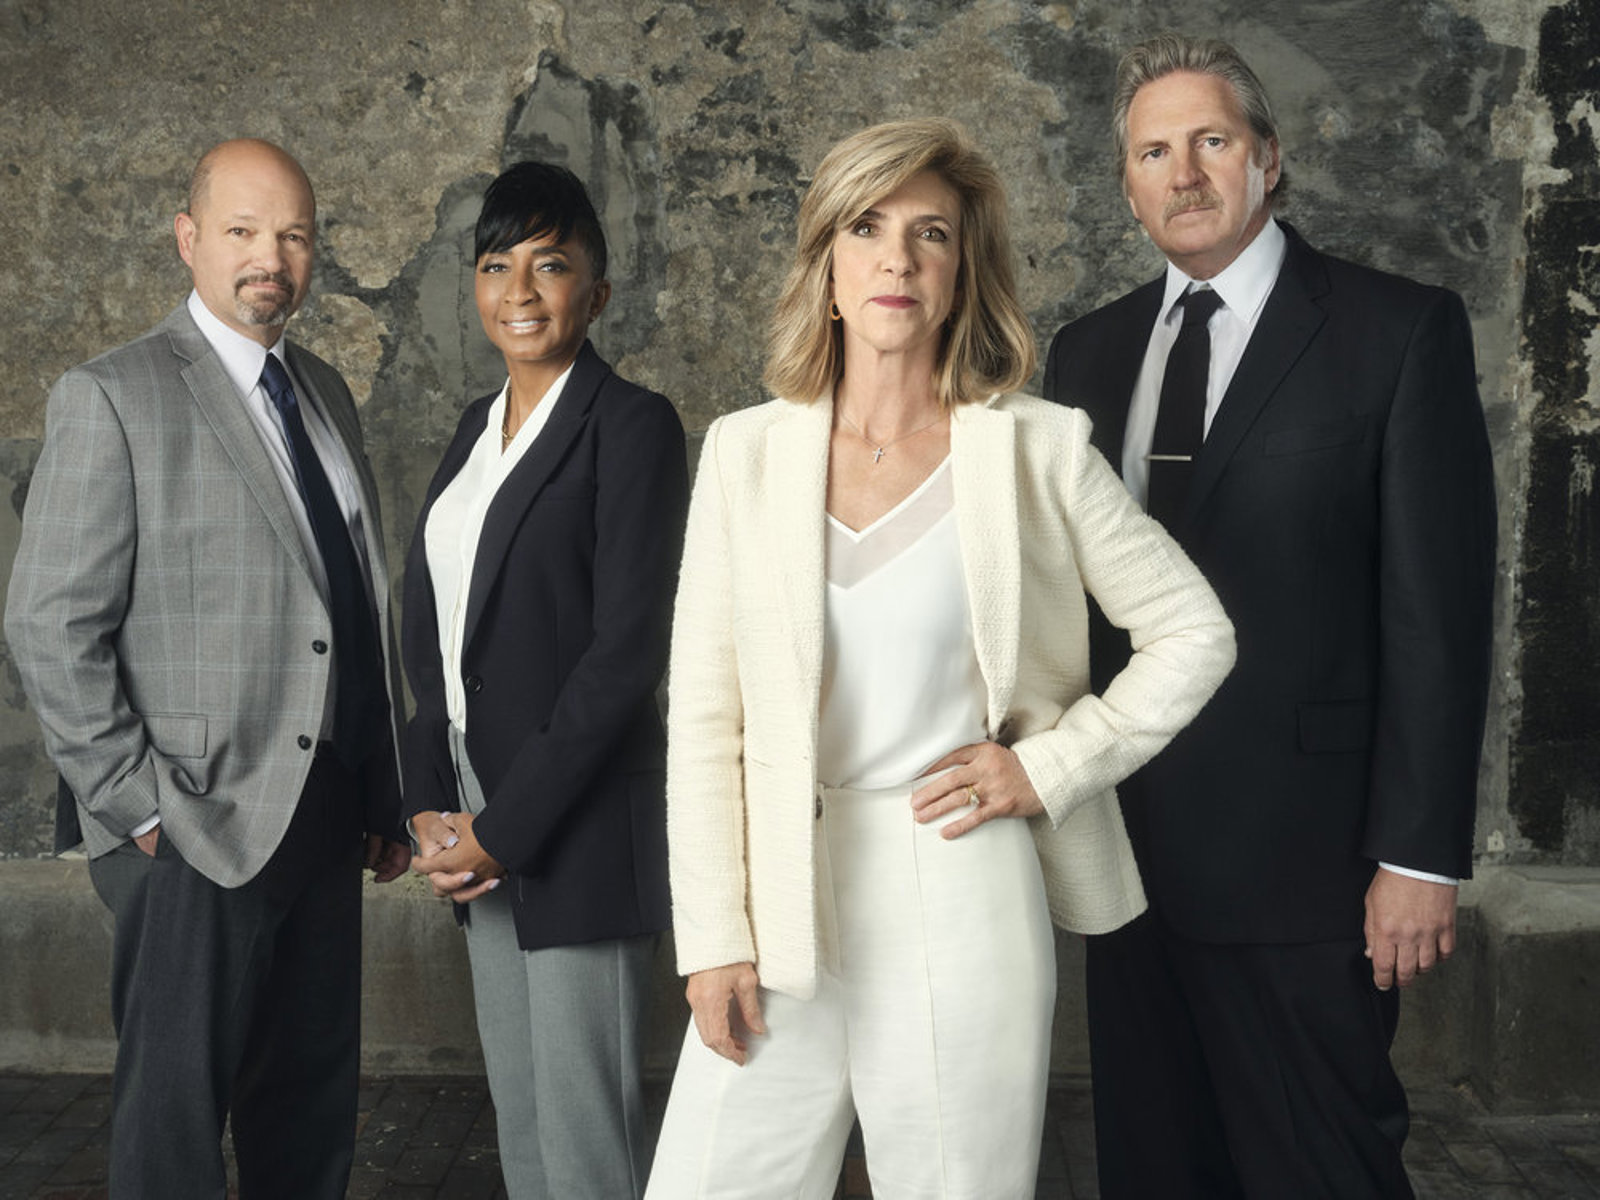 Magical Elves' true-crime series Cold Justice returns to Oxygen next month